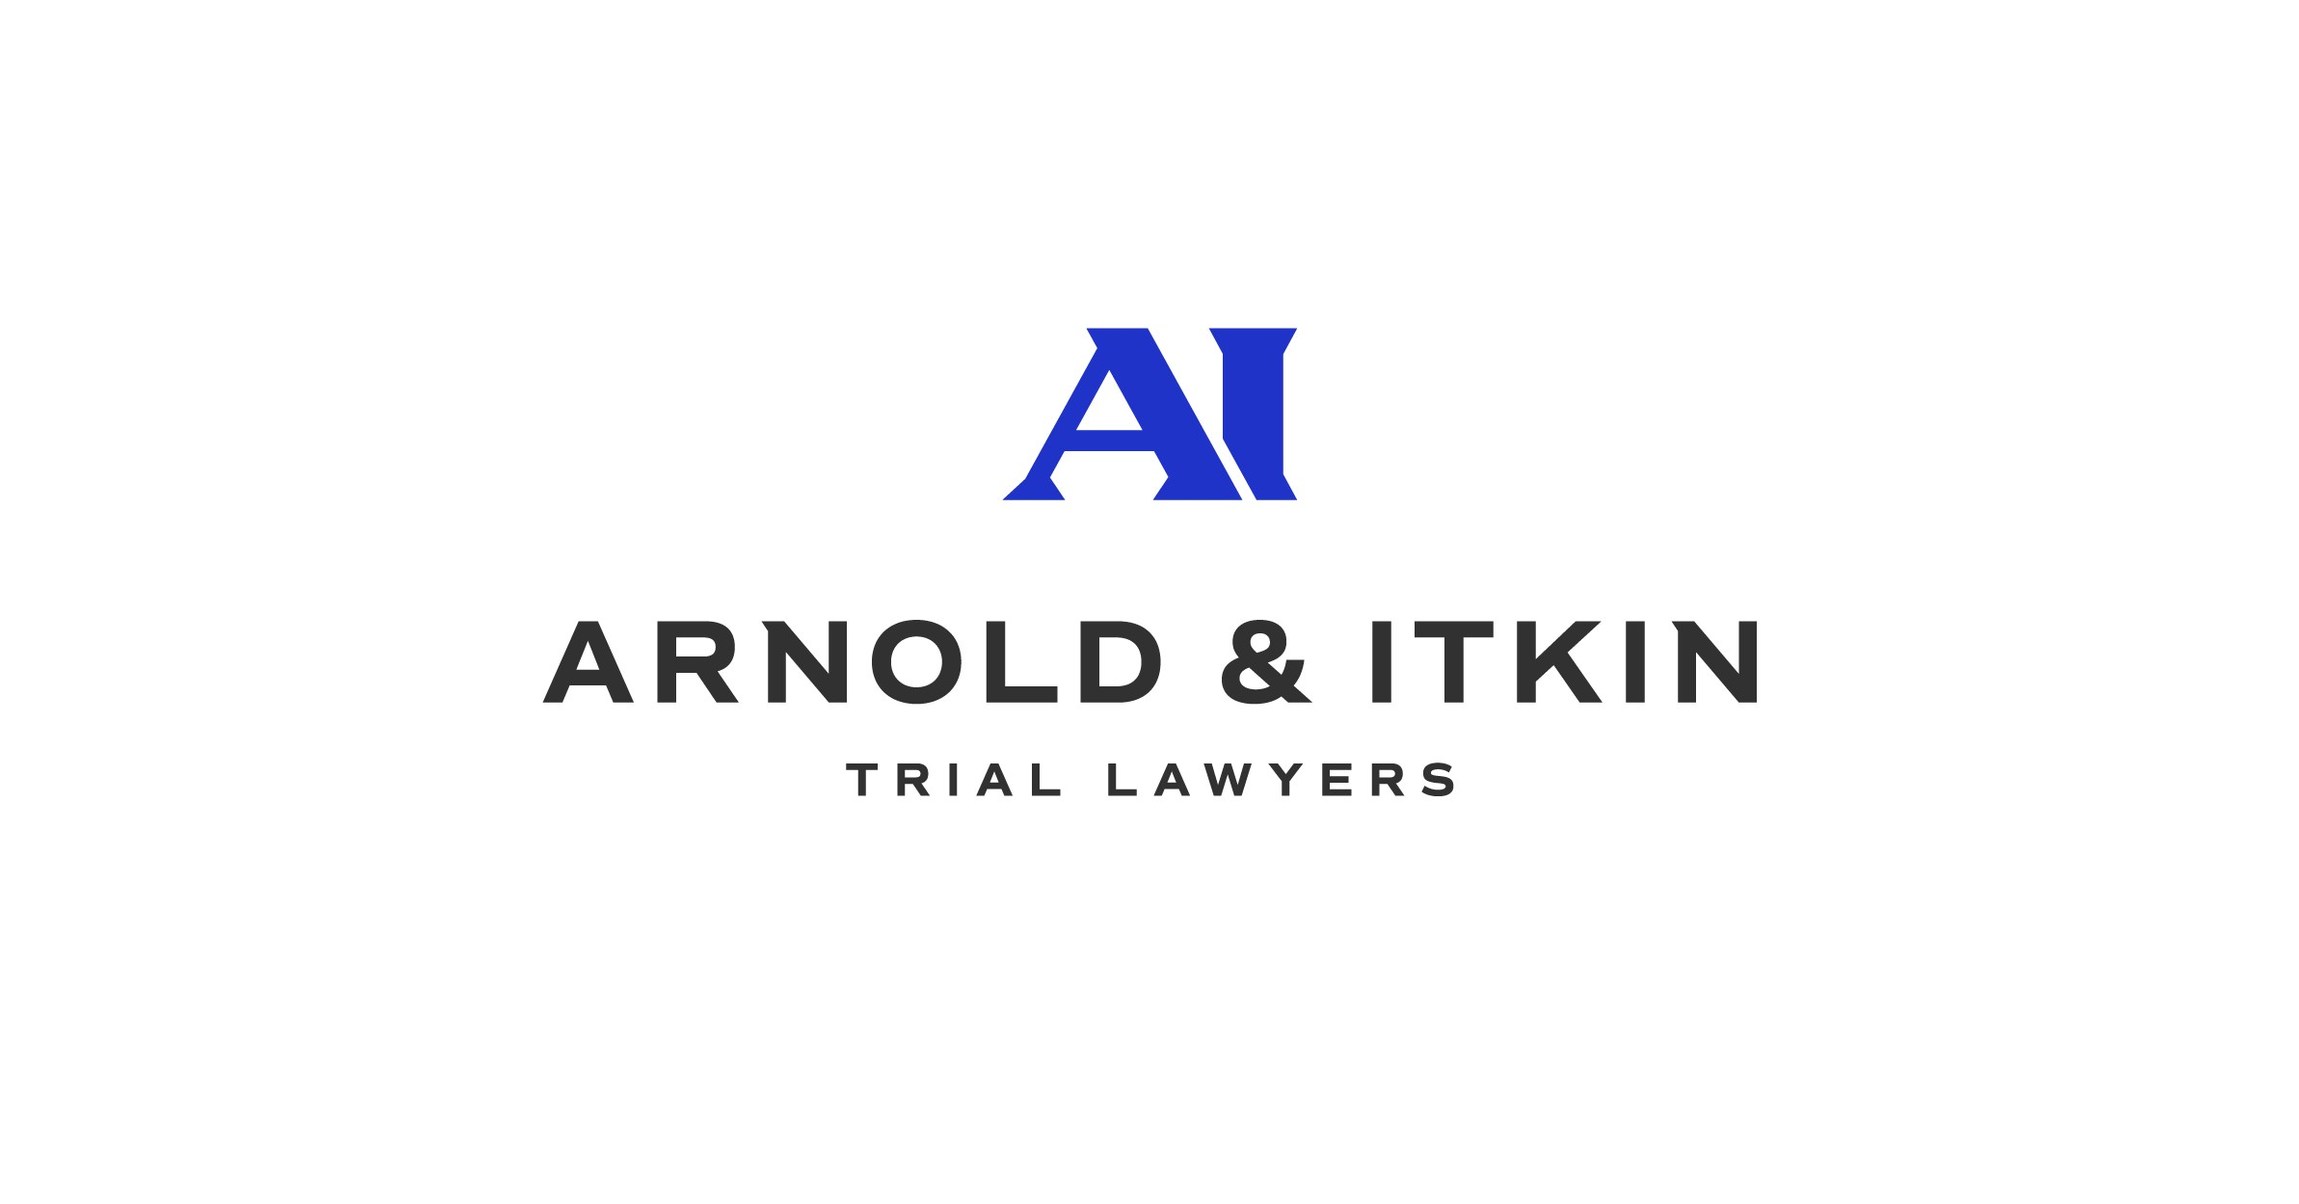 Law firms view Arnold Itkin Log0 